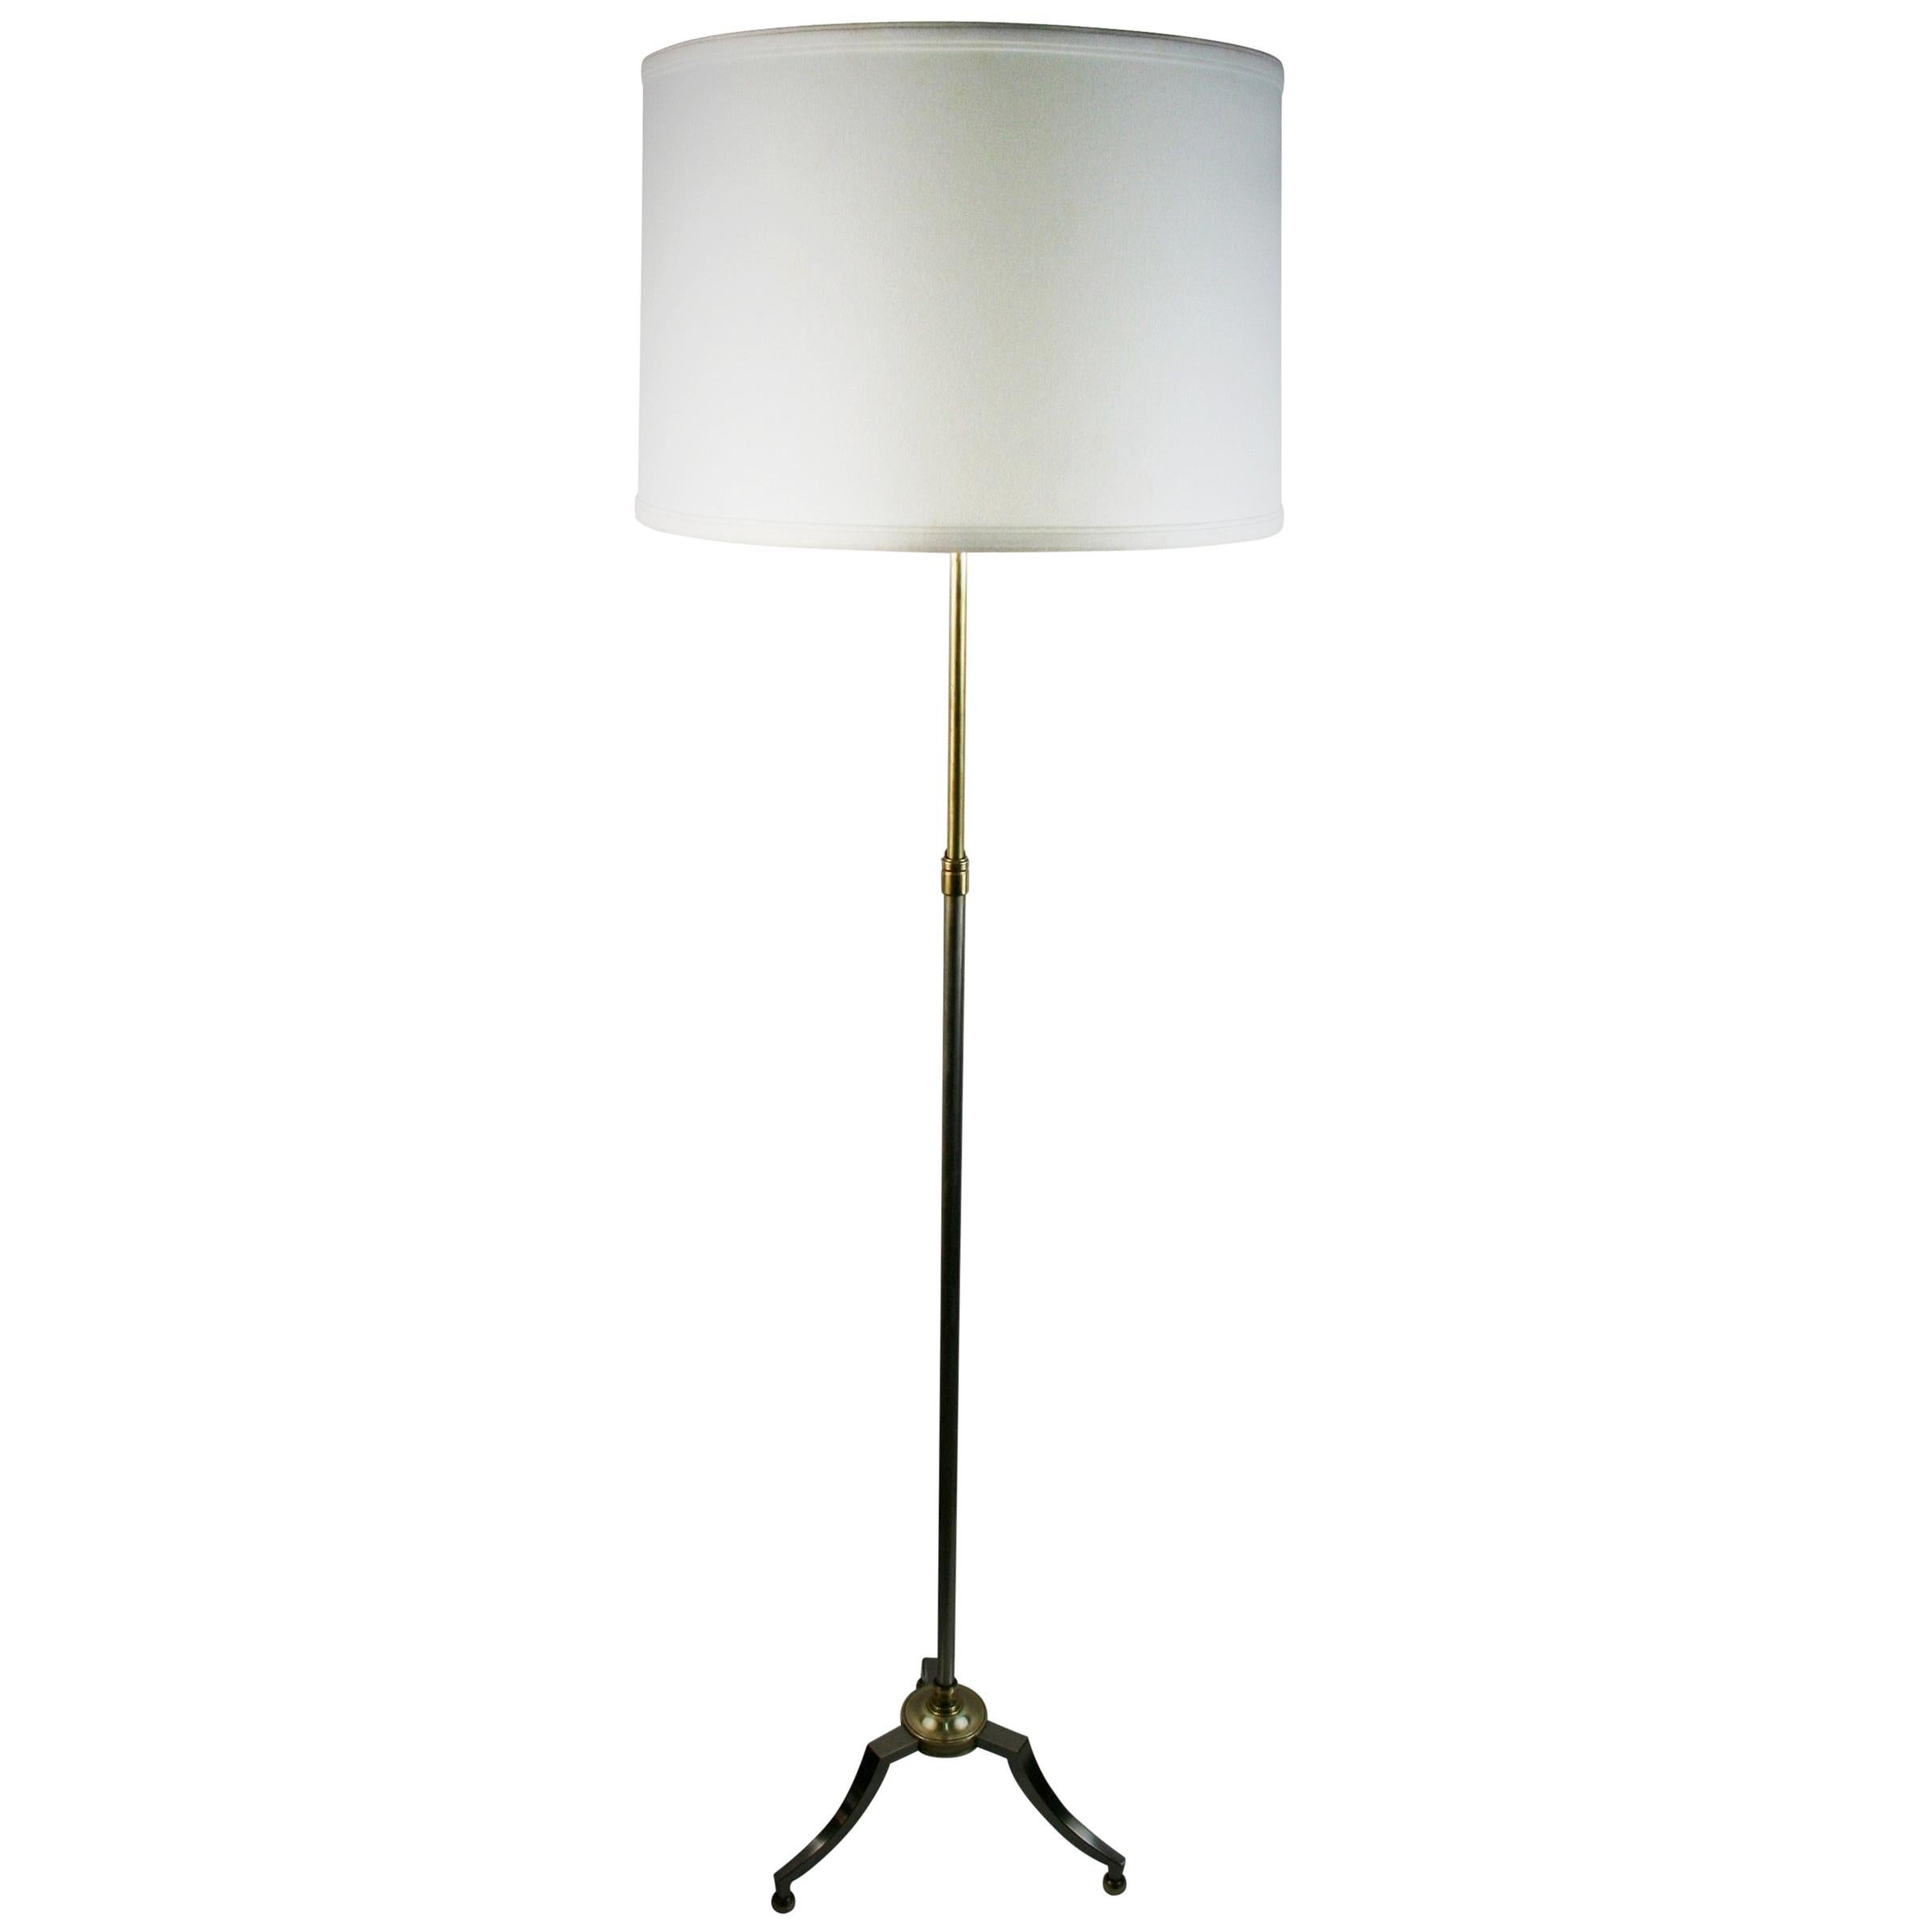 French Mason Jansen Style Adjustable Tripod Floor Lamp '2 available' For Sale